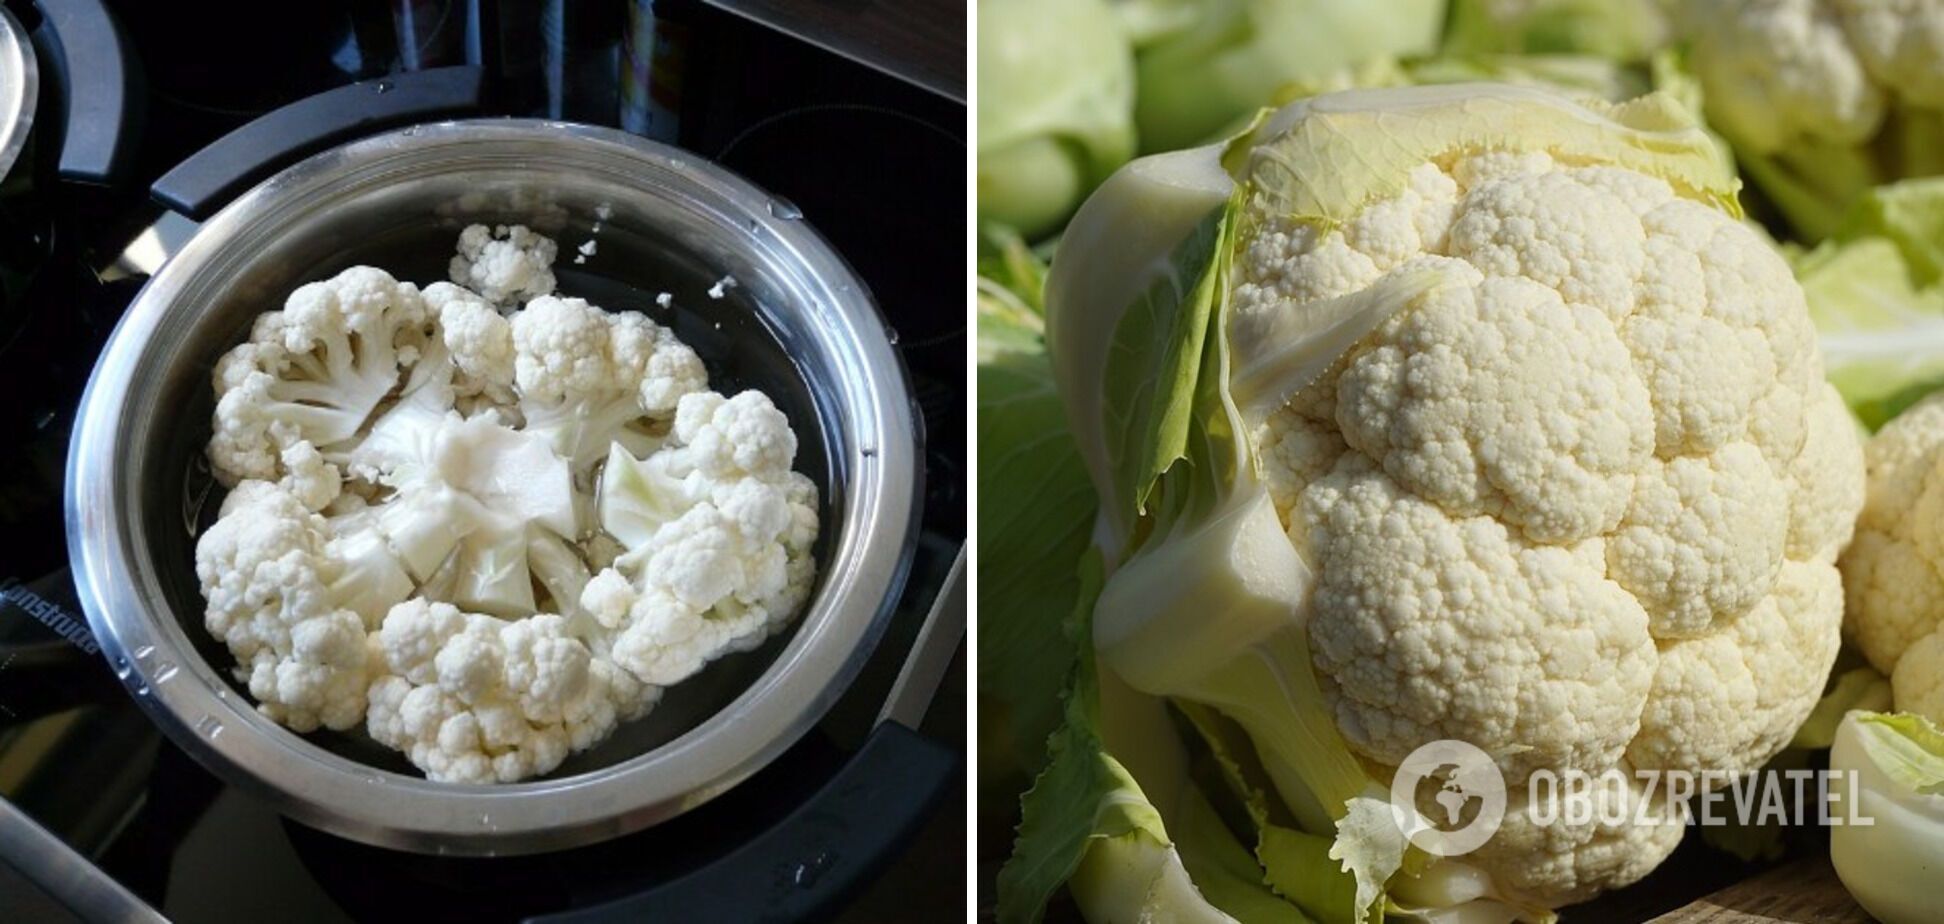 How to cook cauliflower deliciously in the oven